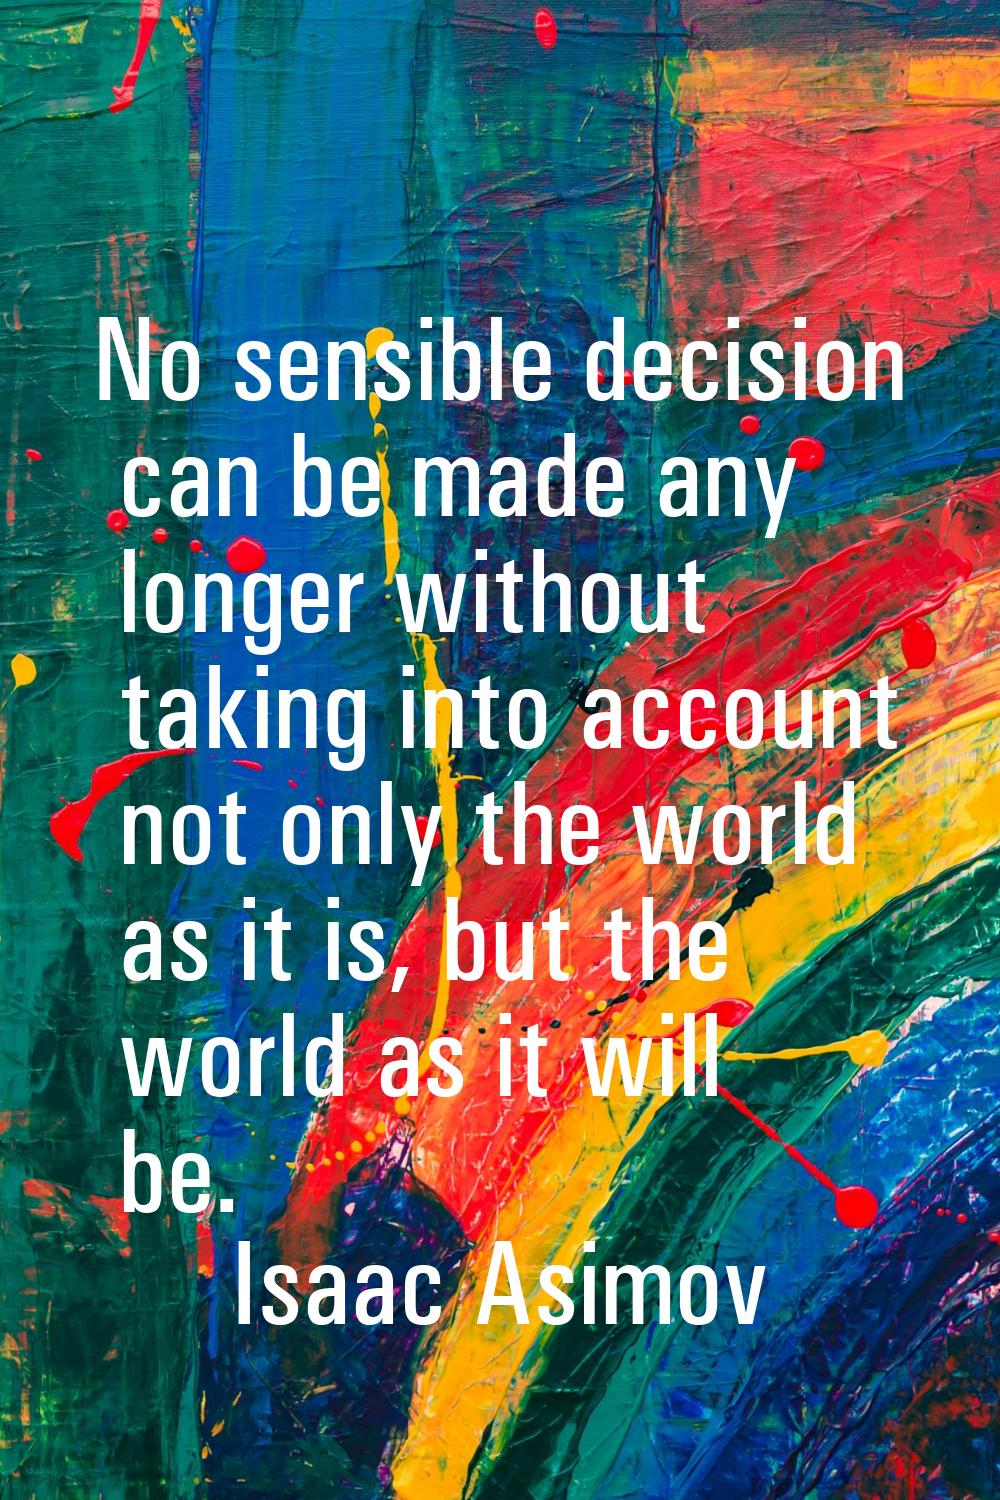 No sensible decision can be made any longer without taking into account not only the world as it is